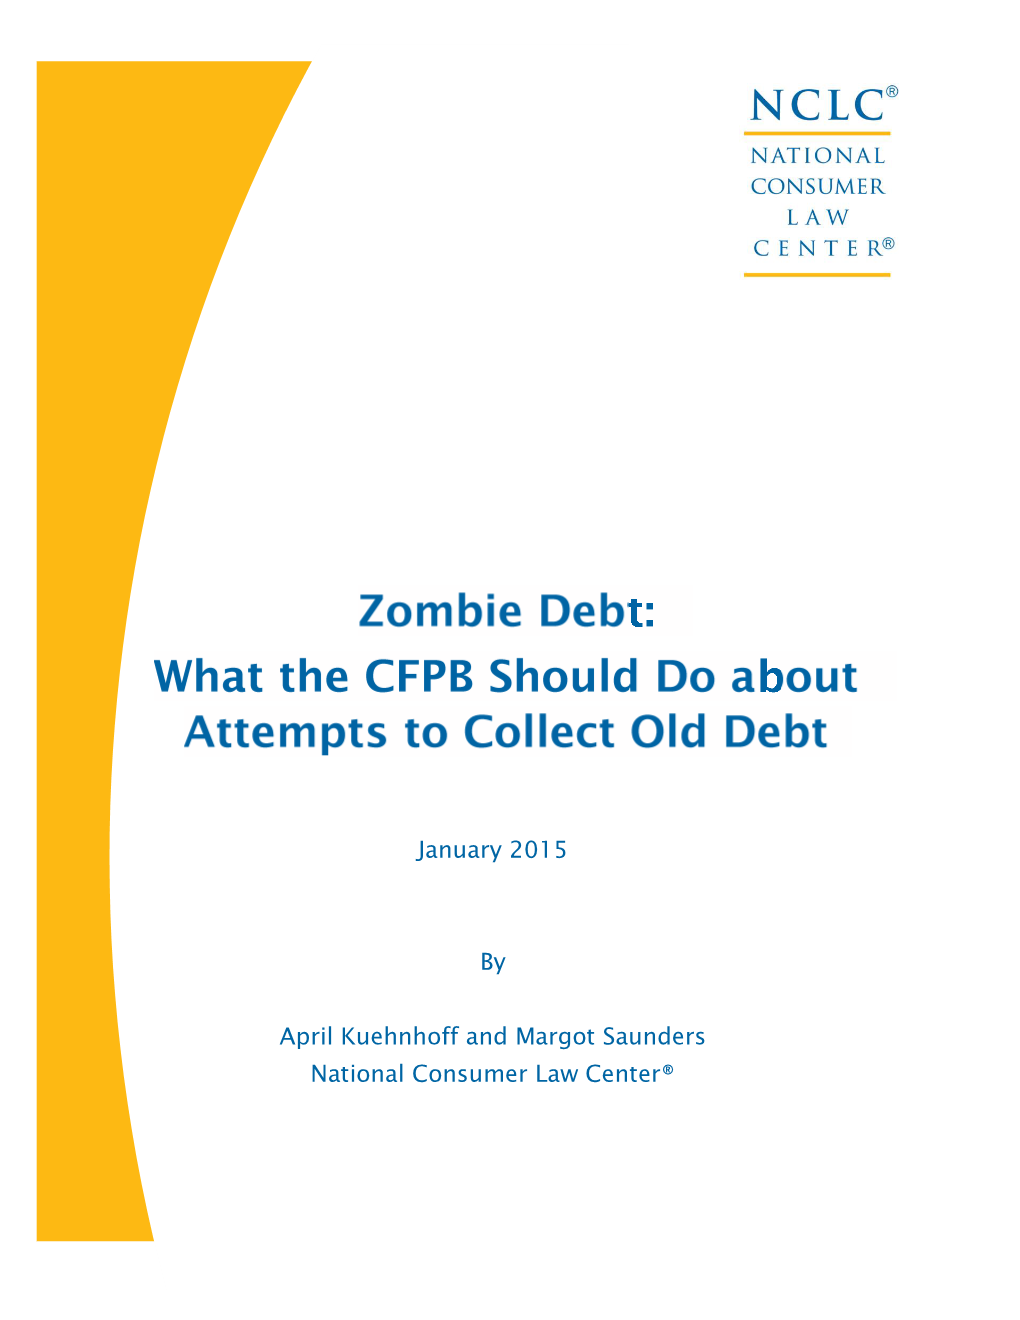 Zombie Debt: What the CFPB Should Do About Attempts to Collect